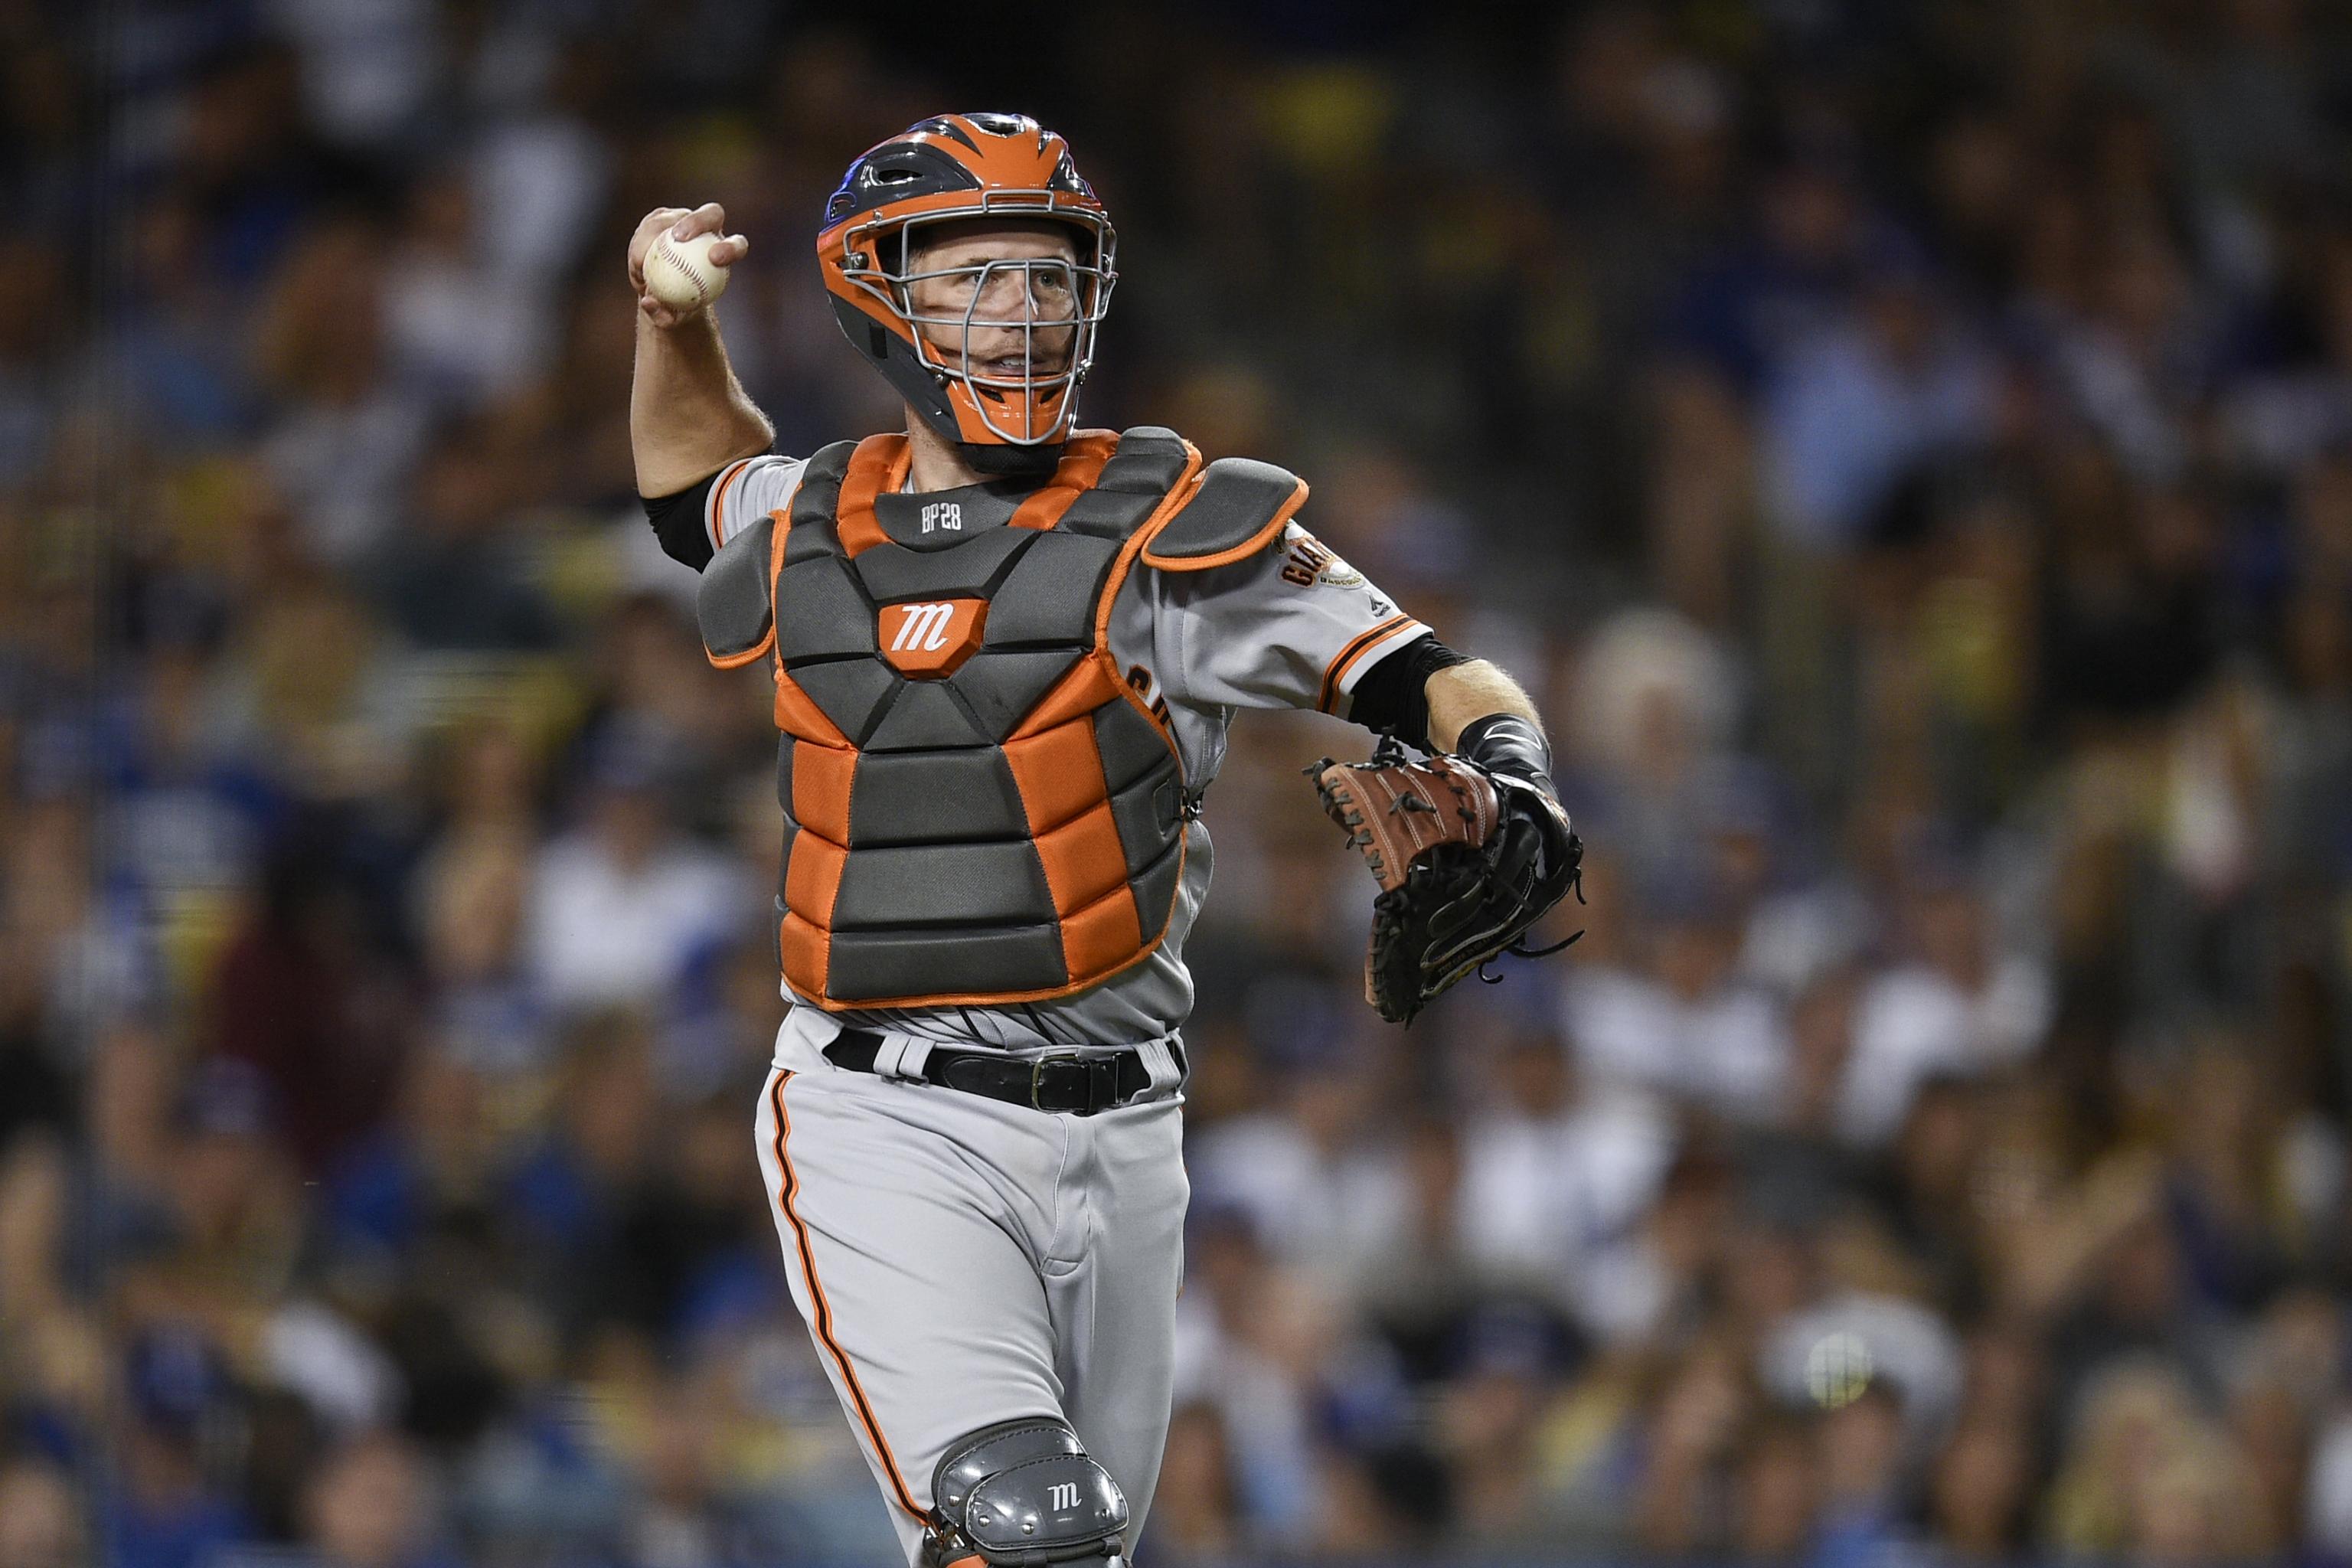 Buster Posey announces adoption of twin girls, opts out of